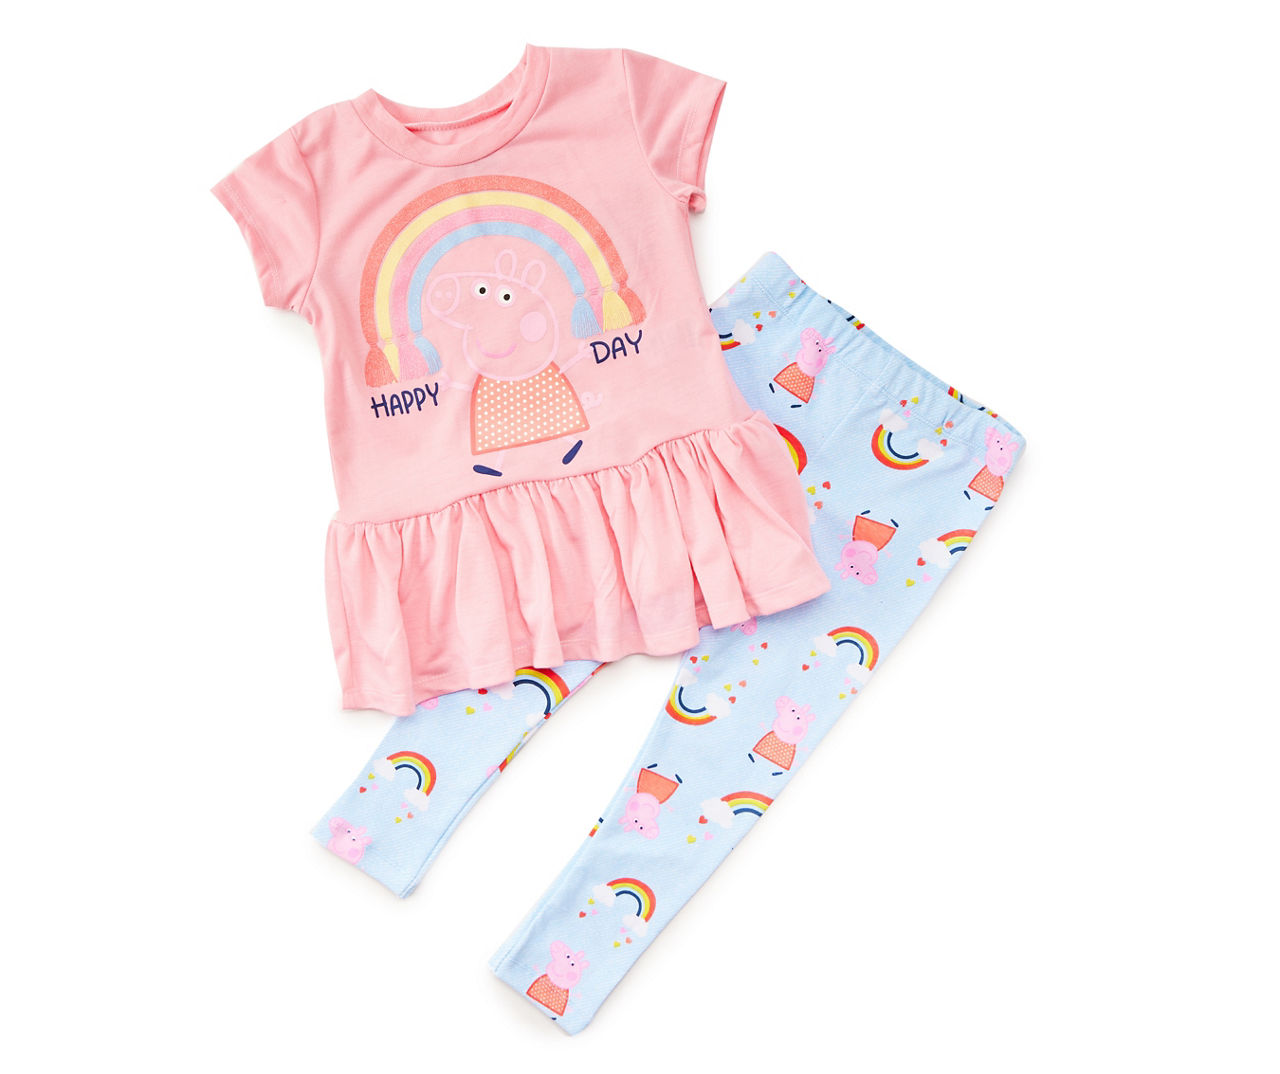 Toddler Size 4T Peppa Pig "Happy Day" Pink Ruffle Tee & Blue Pants